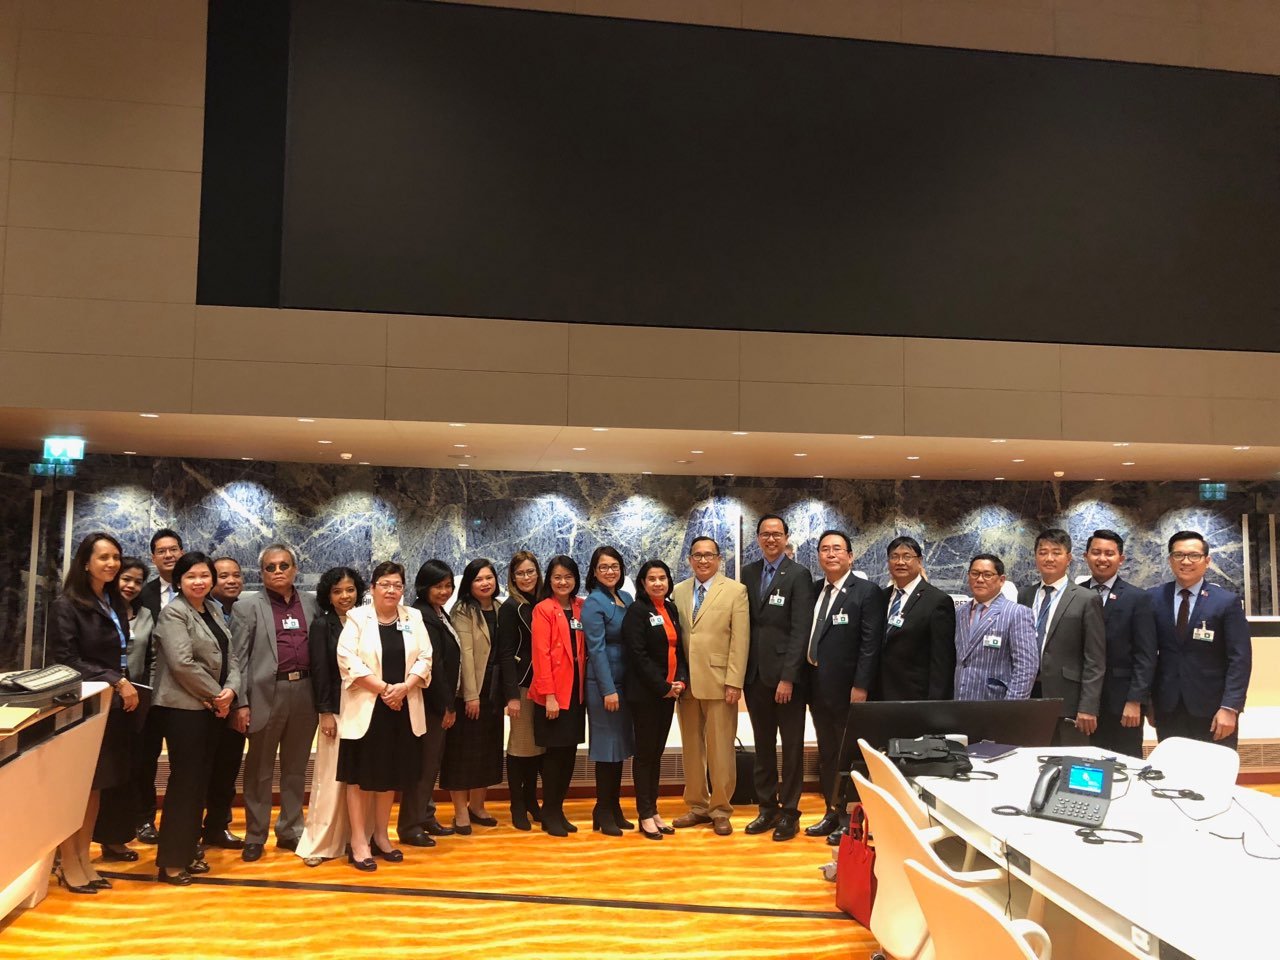 Philippines’ First Constructive Dialogue with the United Nations Committee on the Rights of Persons with Disabilities (CRPD) held on 12-13 September 2018